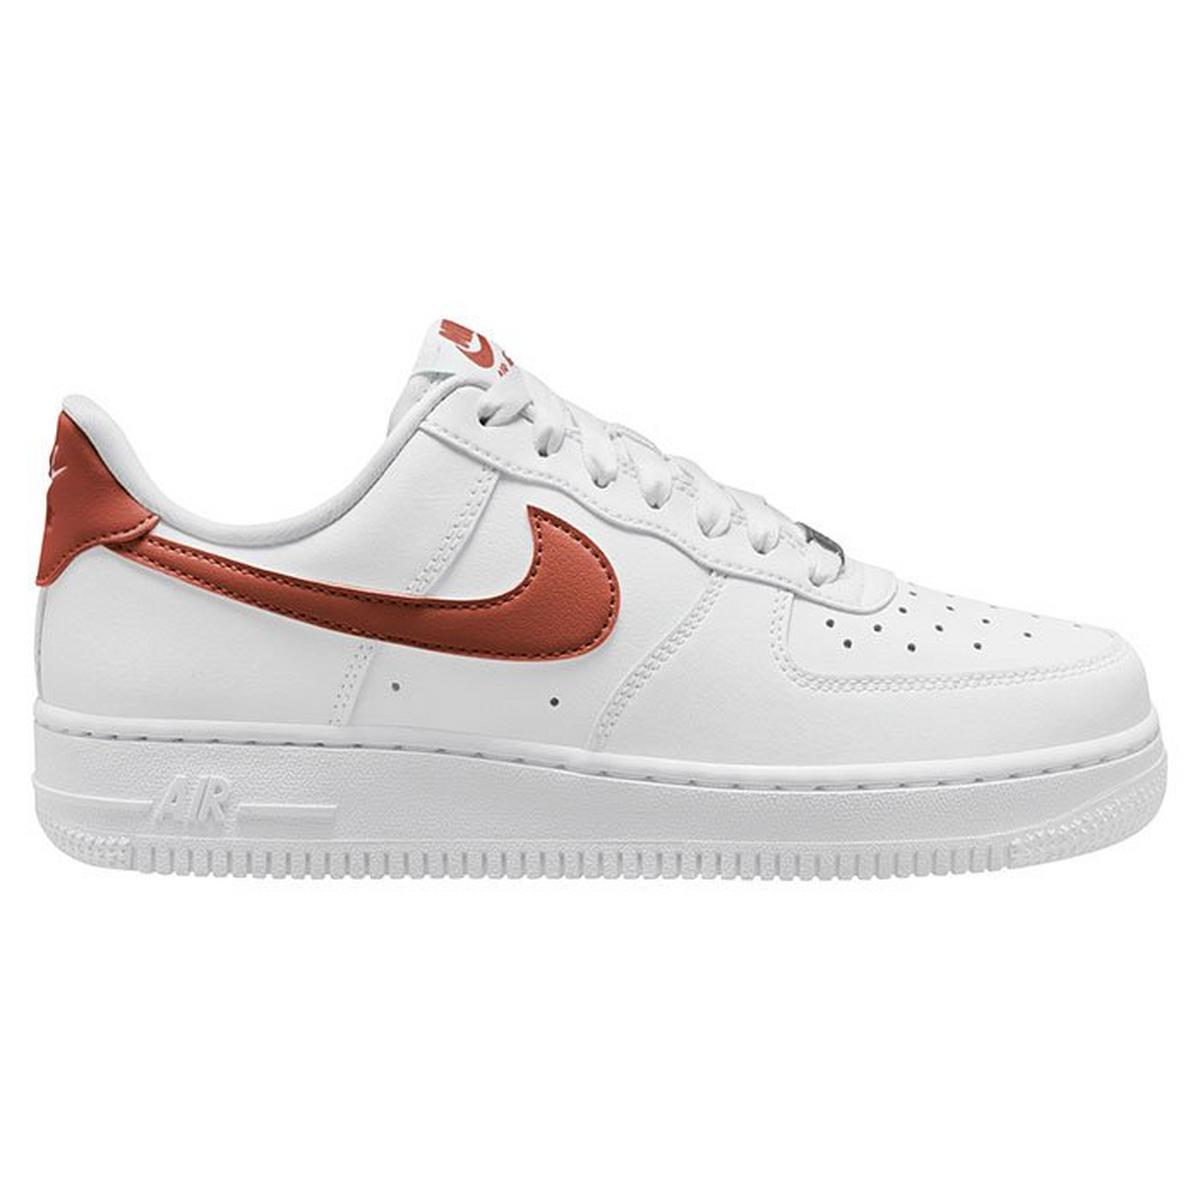 Chaussures Air Force 1 '07 Essential pour femmes